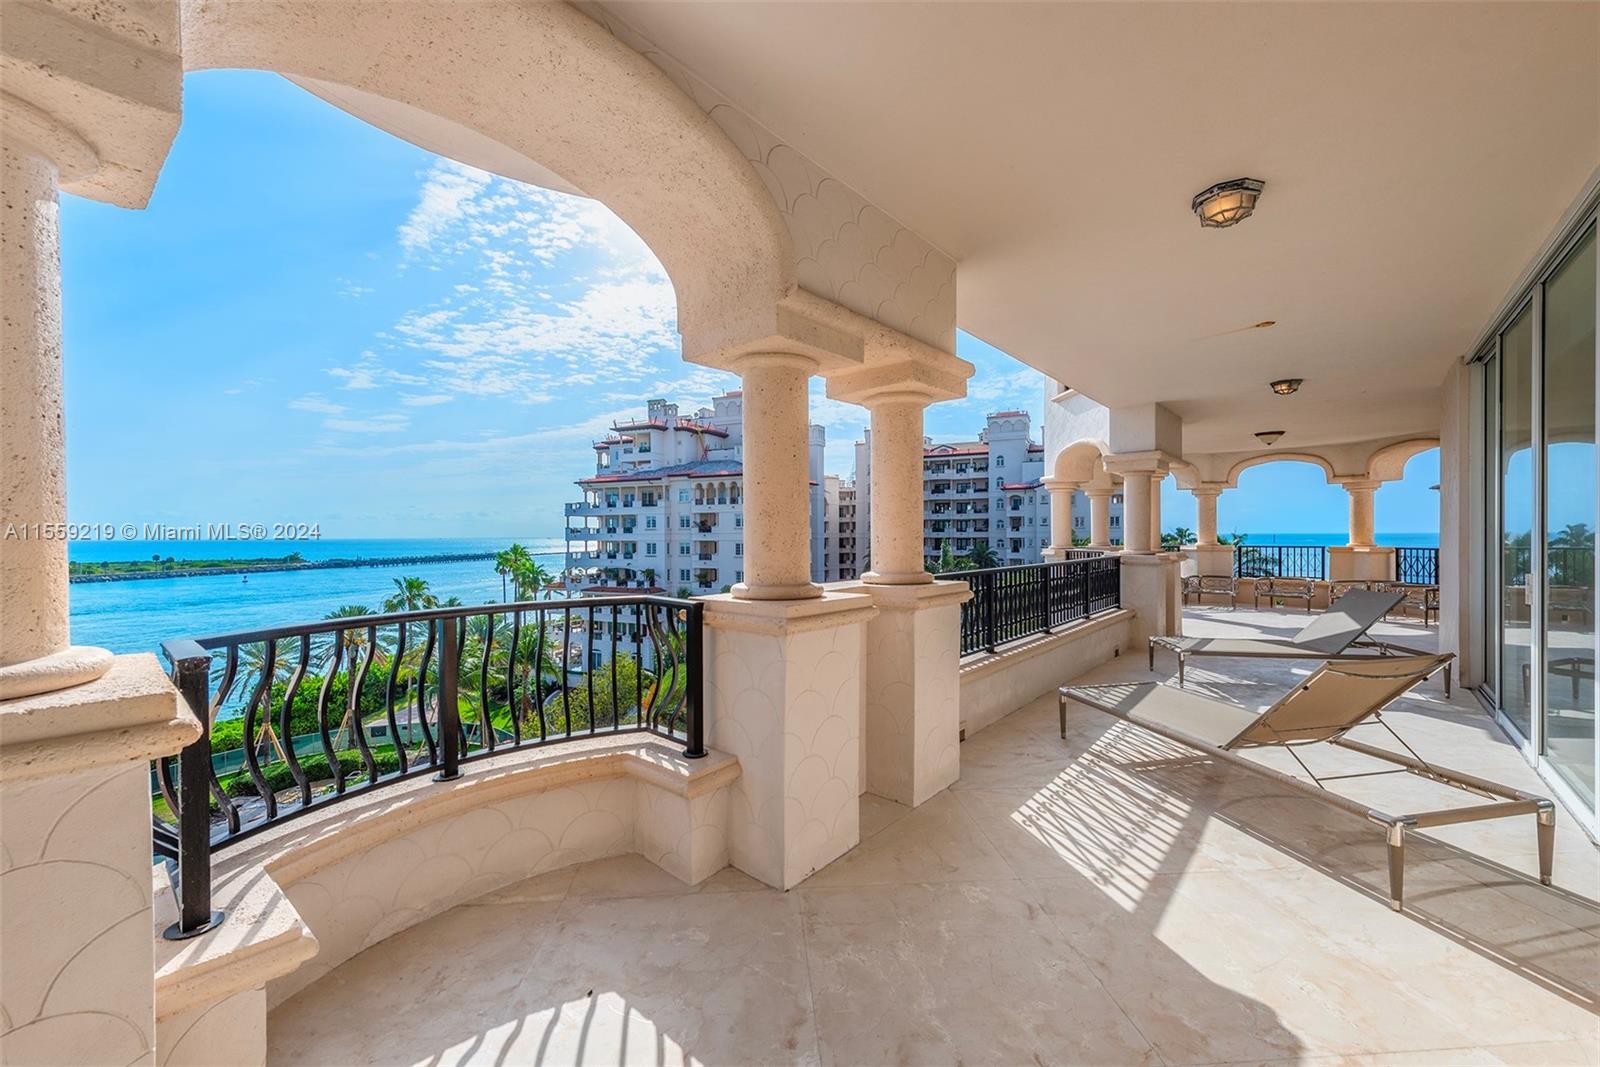 17. Fisher Island Dr